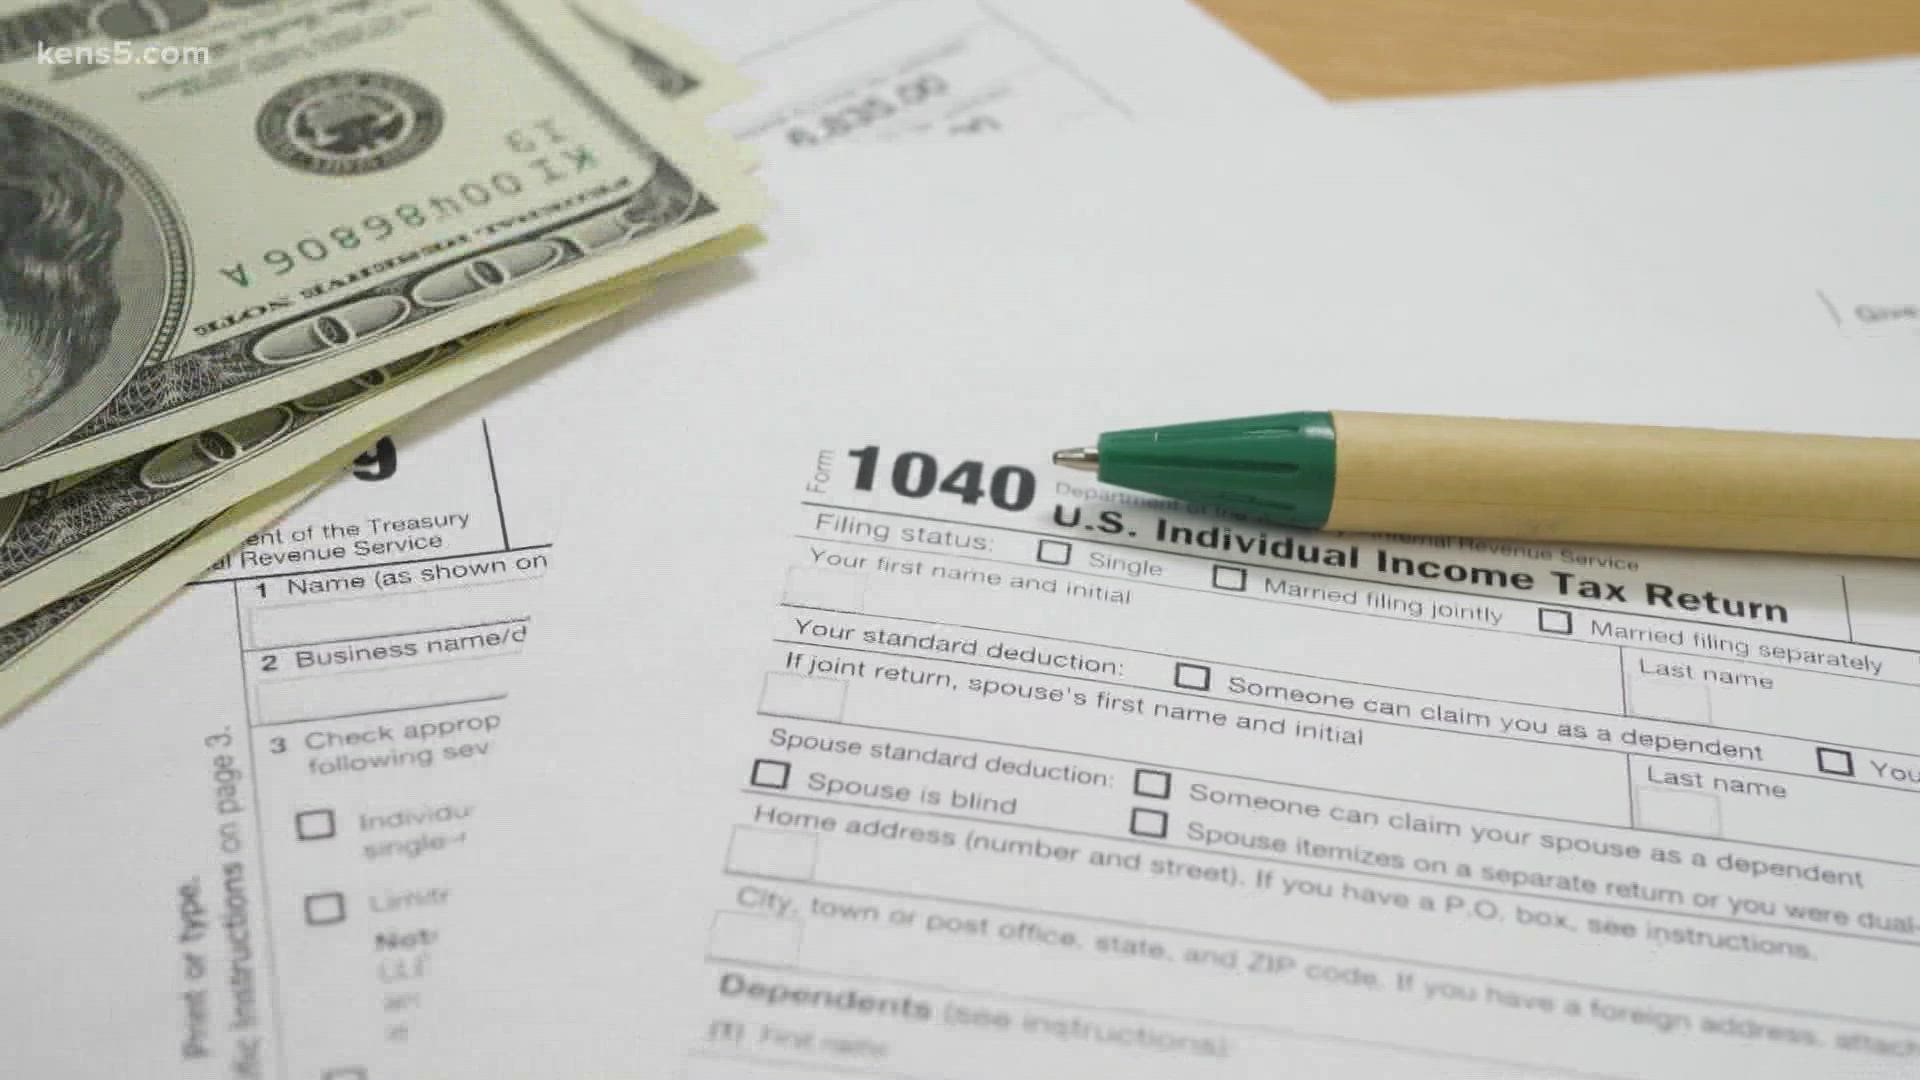 The IRS will not give you money you qualify for if you do not claim it.